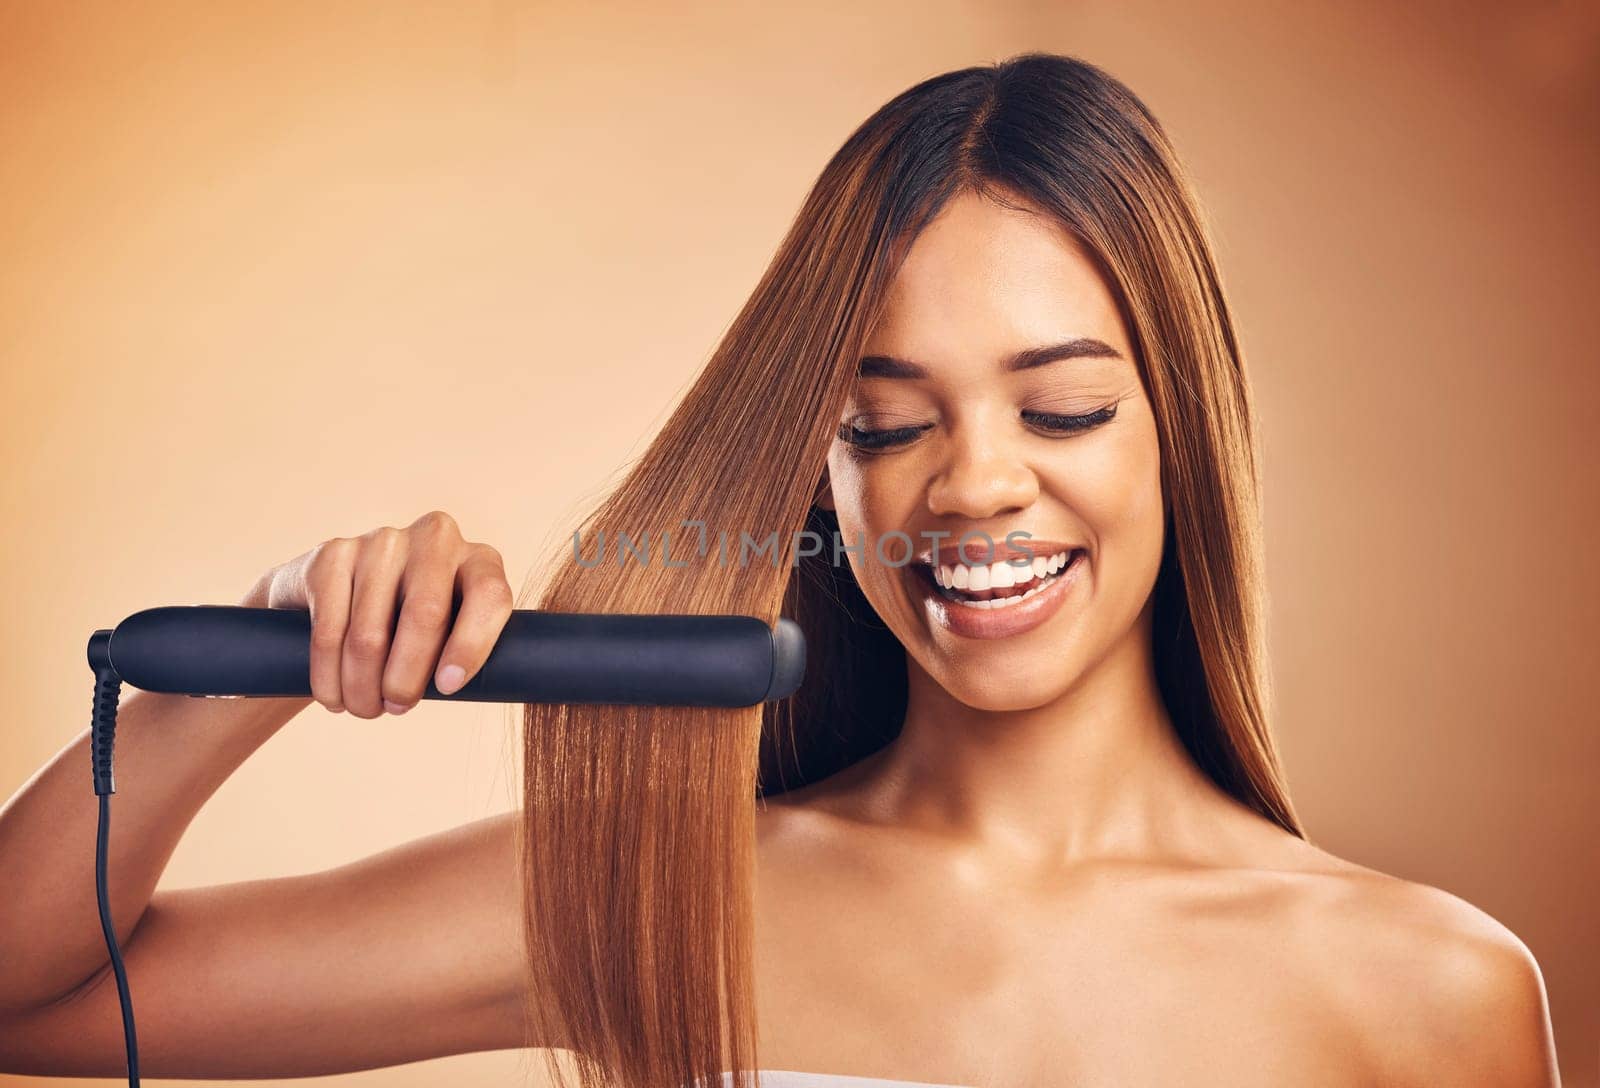 Woman, hair and beauty, flat iron and smile, haircare and keratin treatment isolated on studio background. Female model with highlights, electric straightener and heat, happy with growth and texture by YuriArcurs